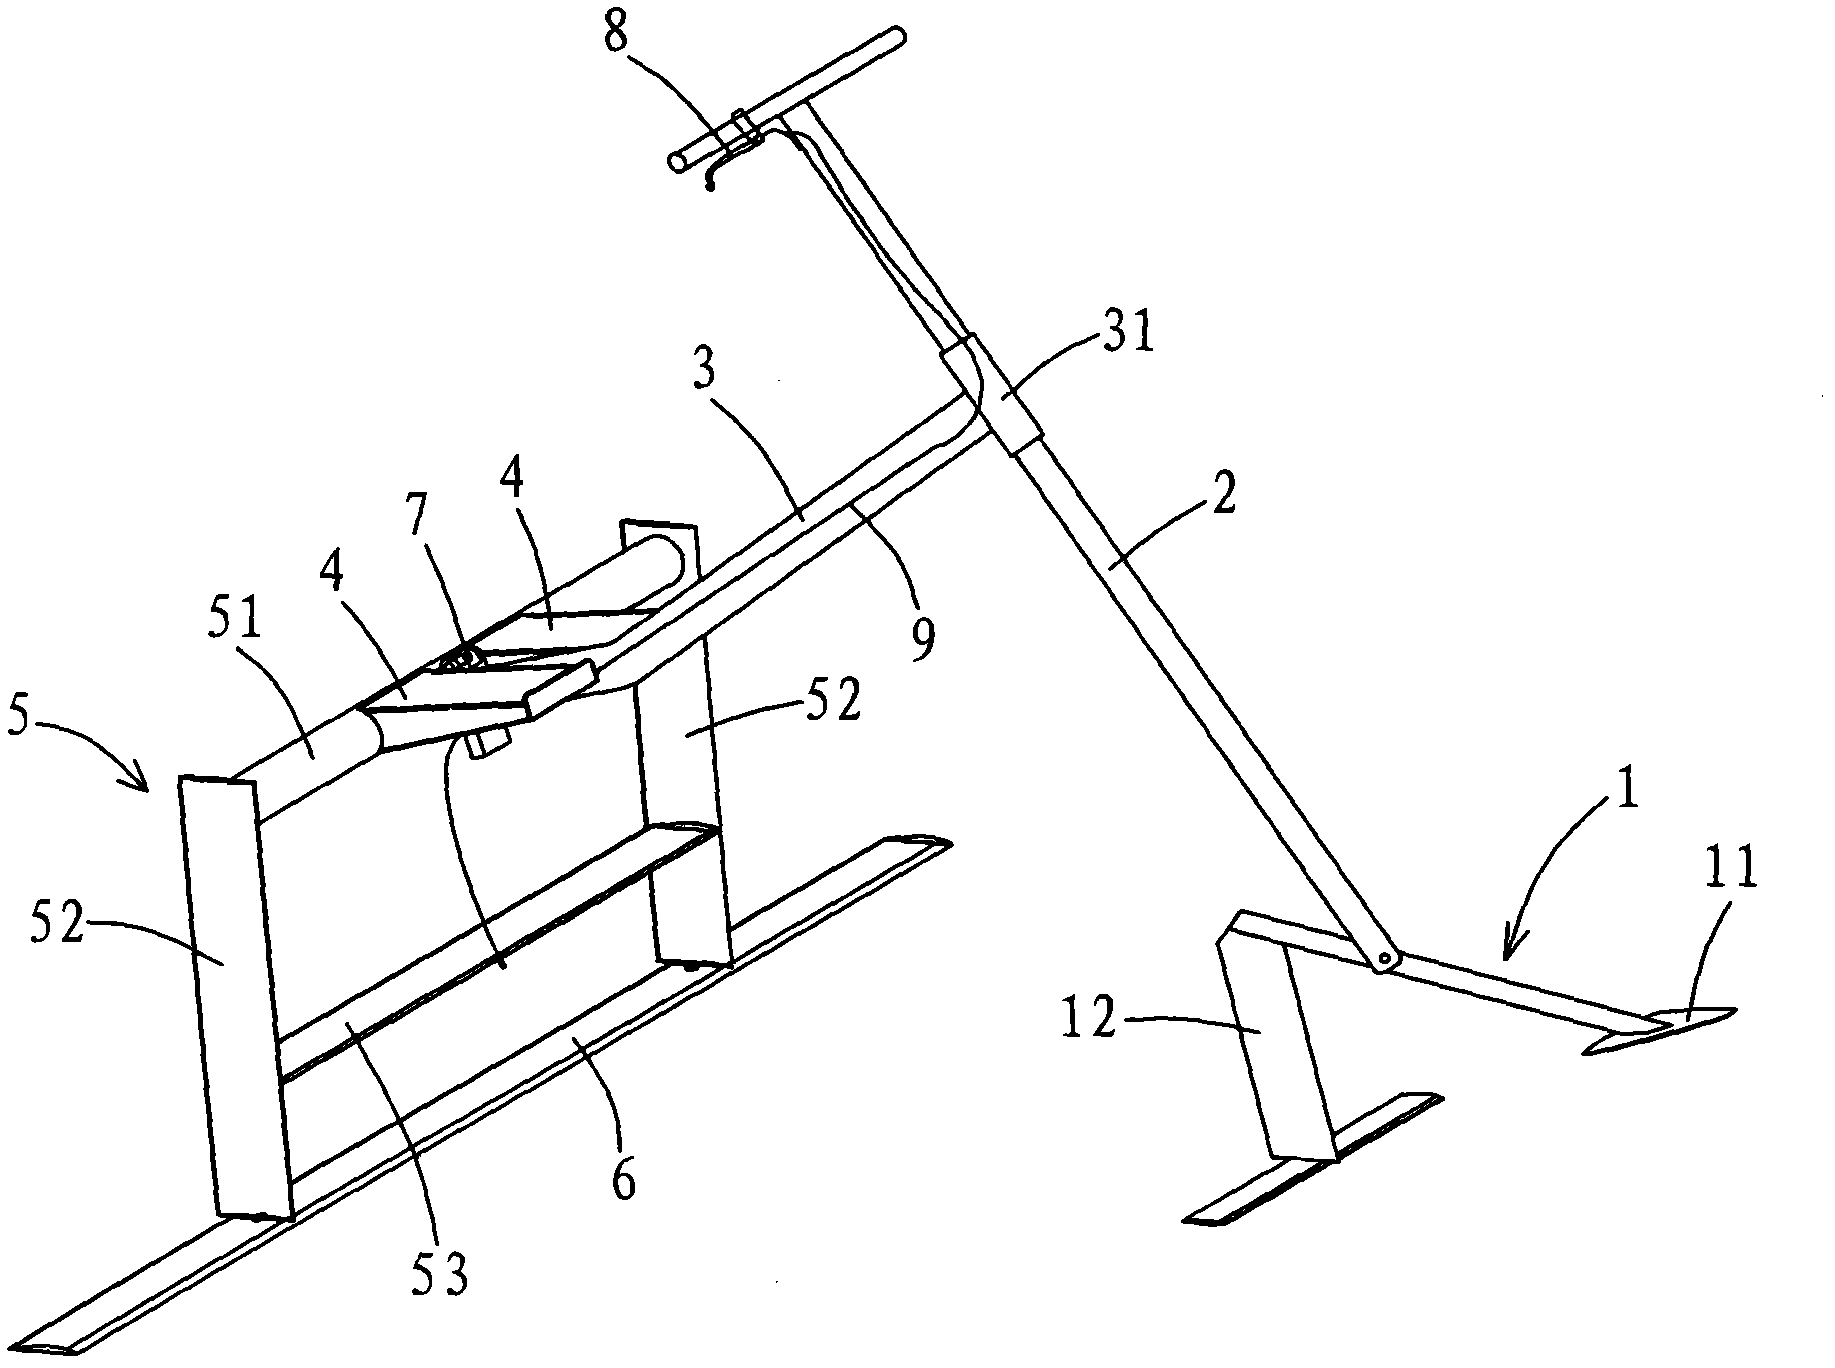 Self-propelled type hydrofoil device